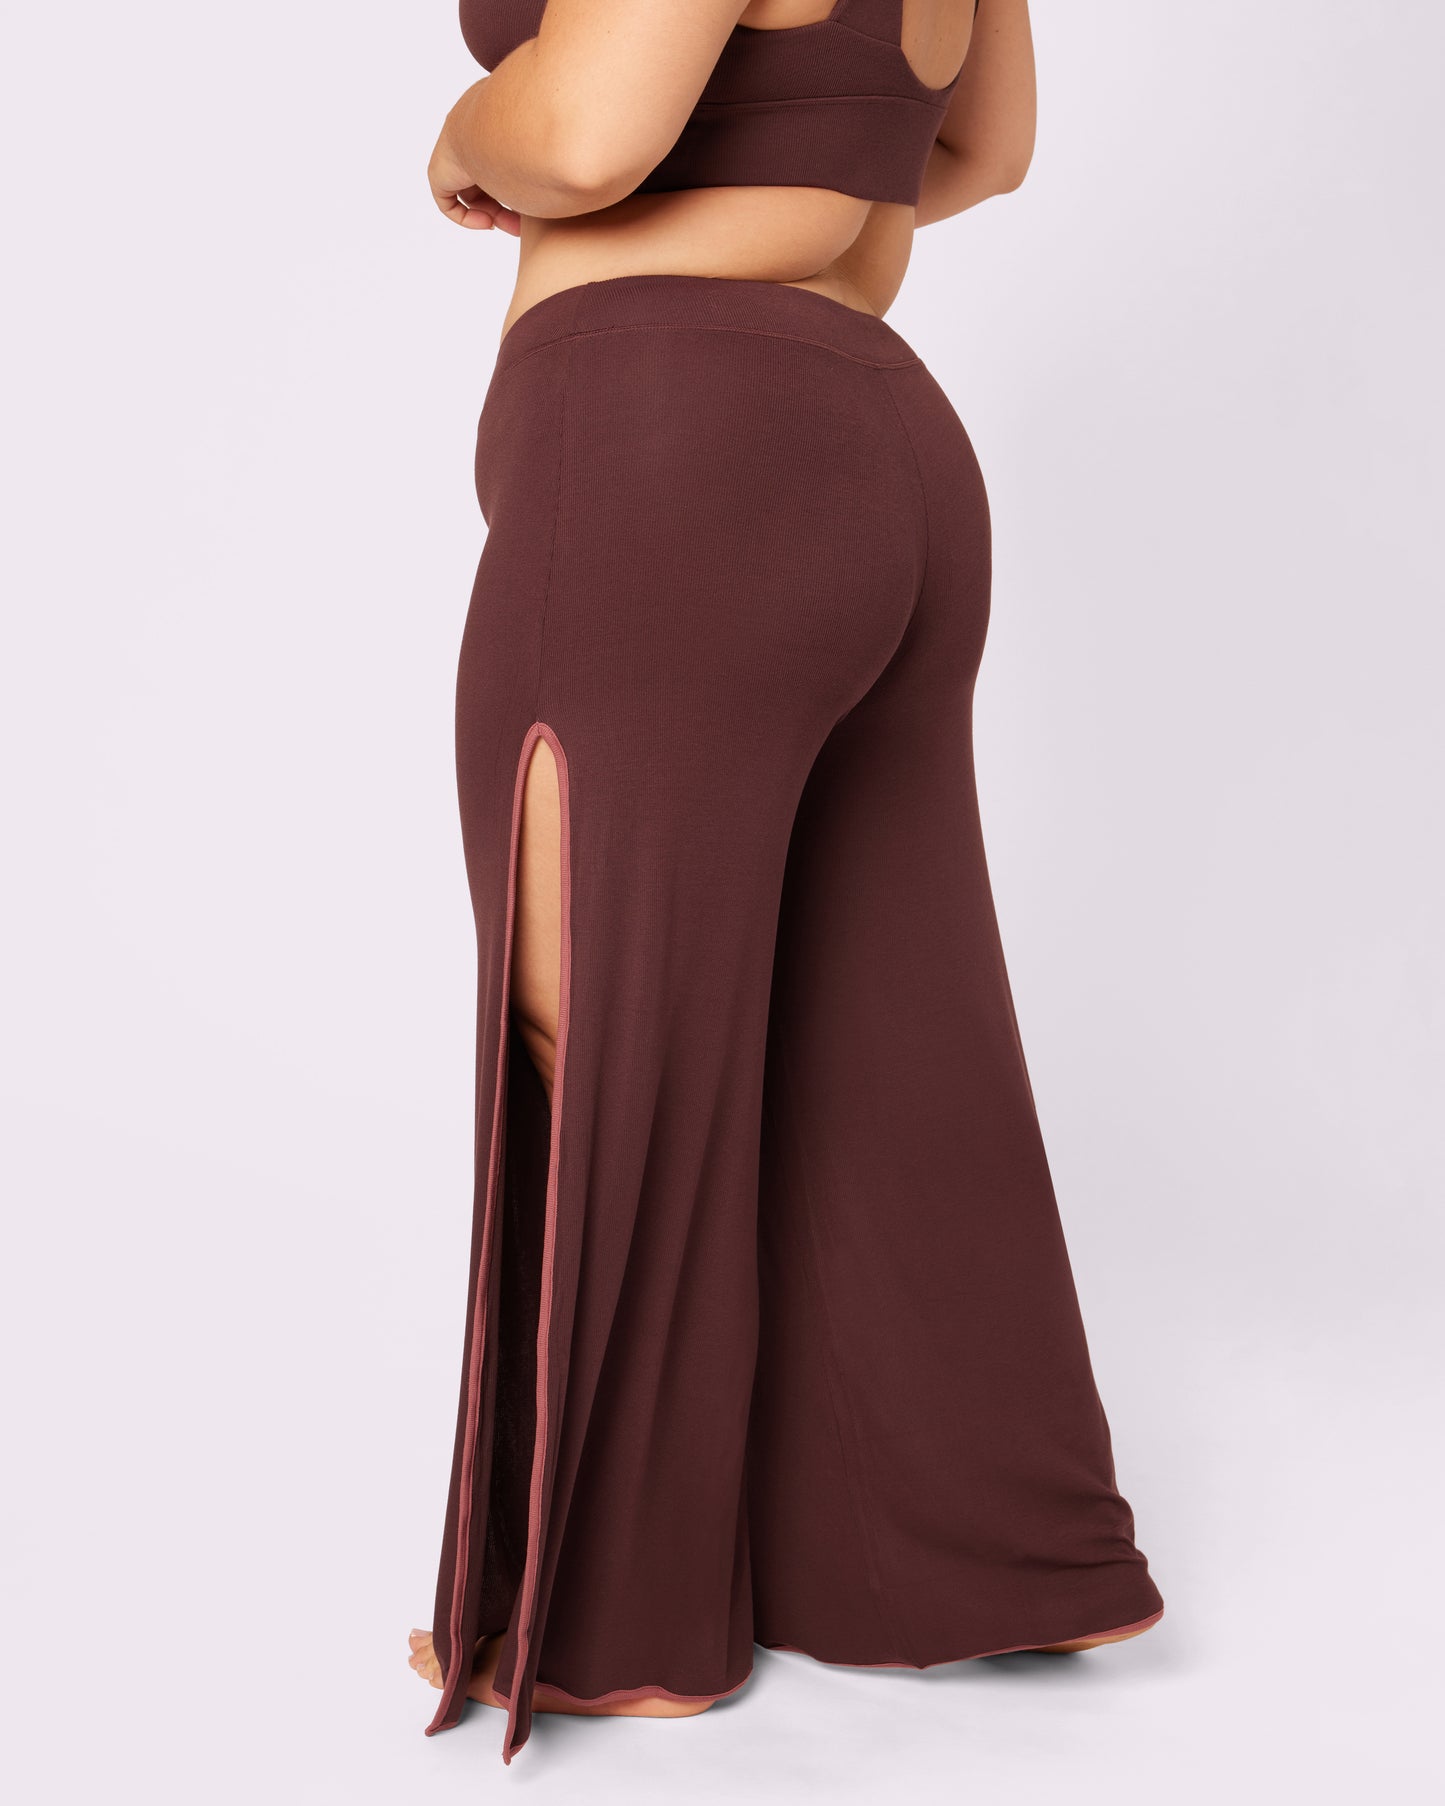 I'm in love with the City Sleek wide leg pants (Roasted Brown, 28